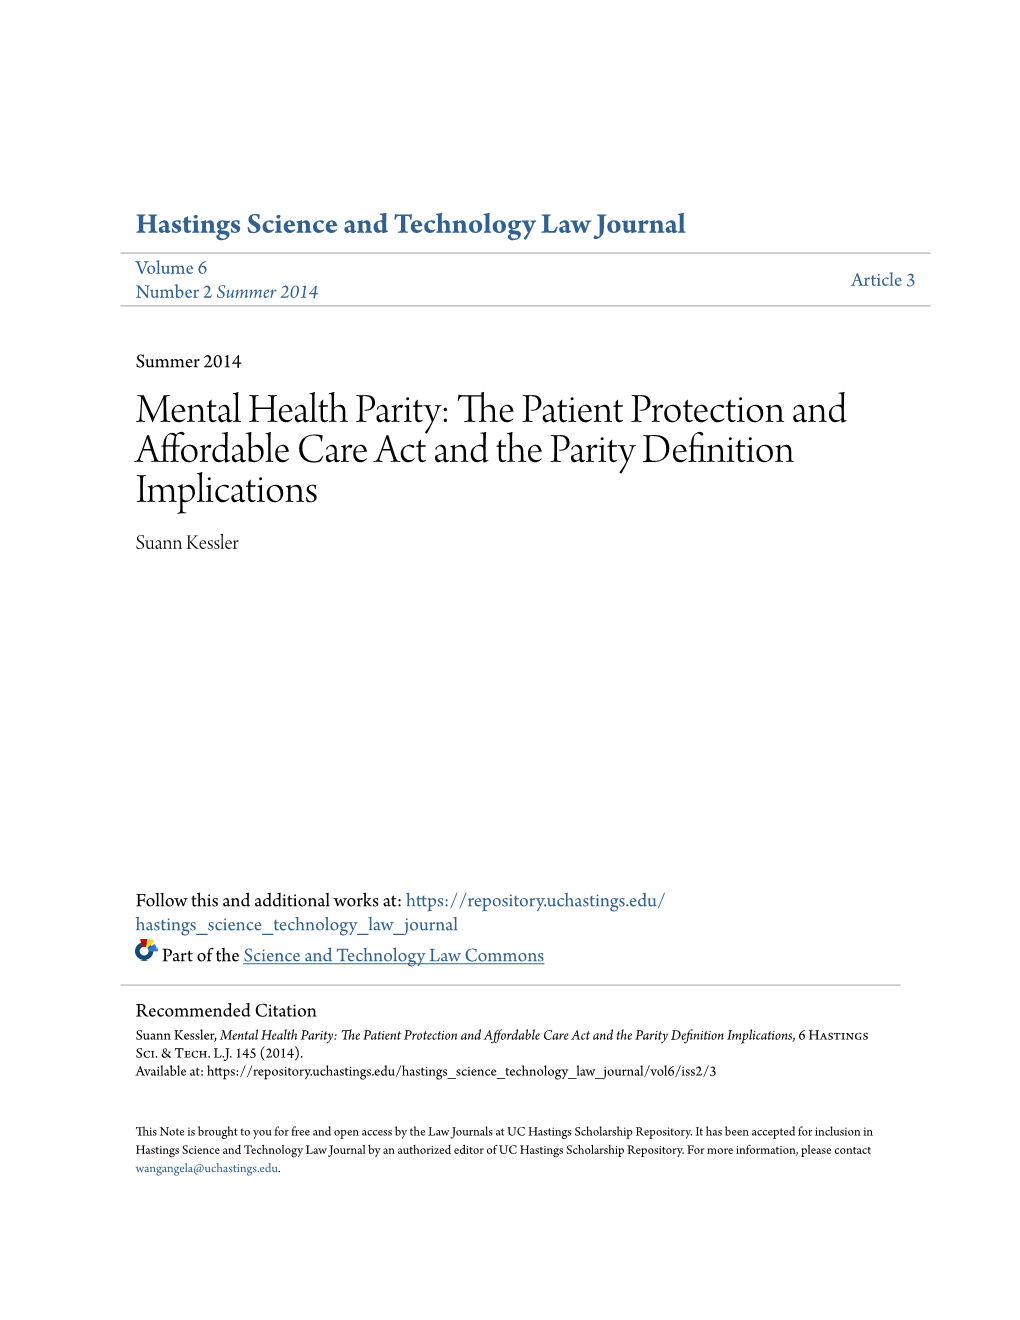 Mental Health Parity: the Ap Tient Protection and Affordable Care Act and the Parity Definition Implications Suann Kessler